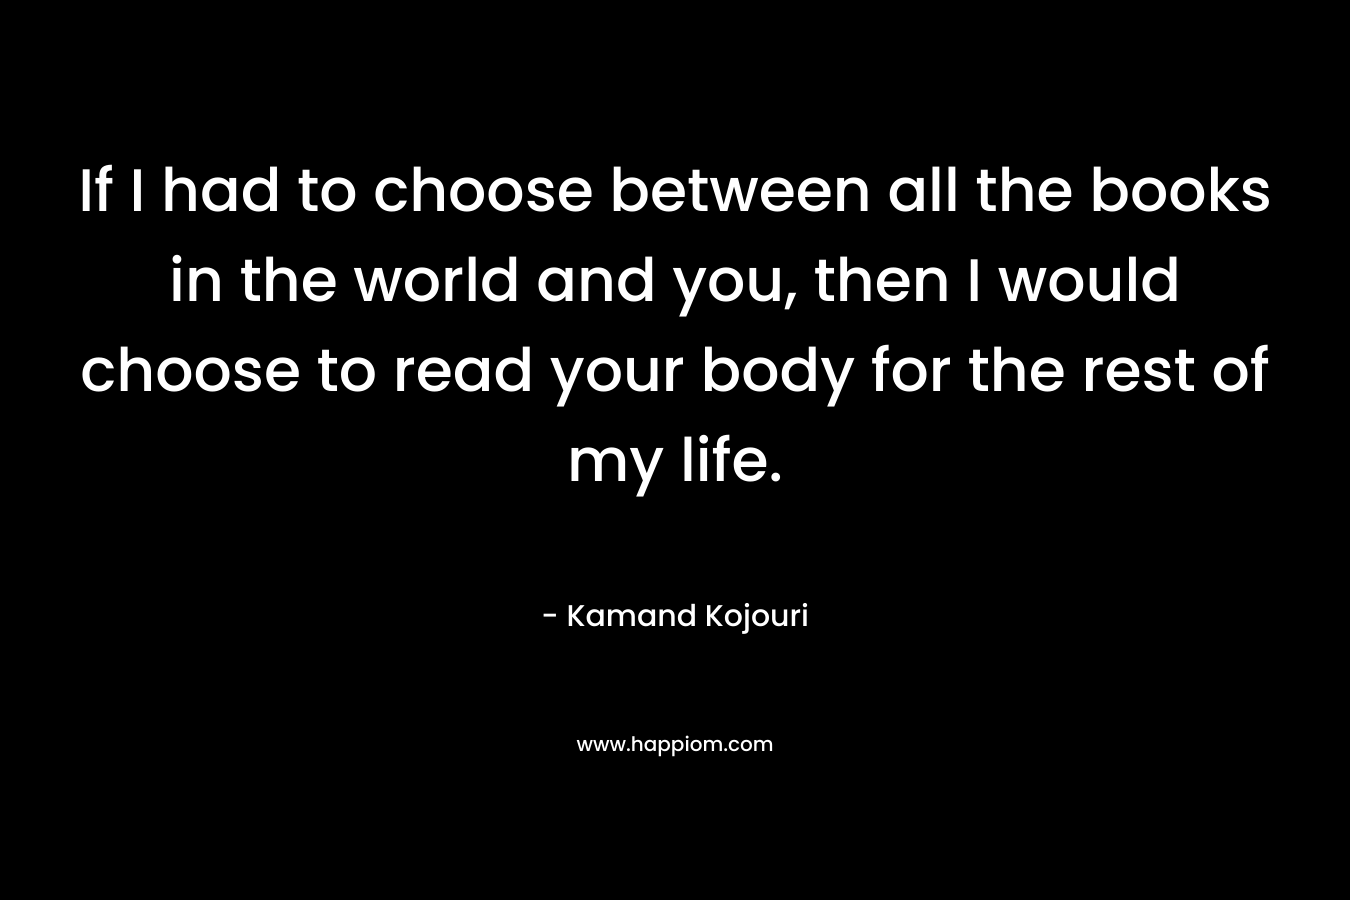 If I had to choose between all the books in the world and you, then I would choose to read your body for the rest of my life.